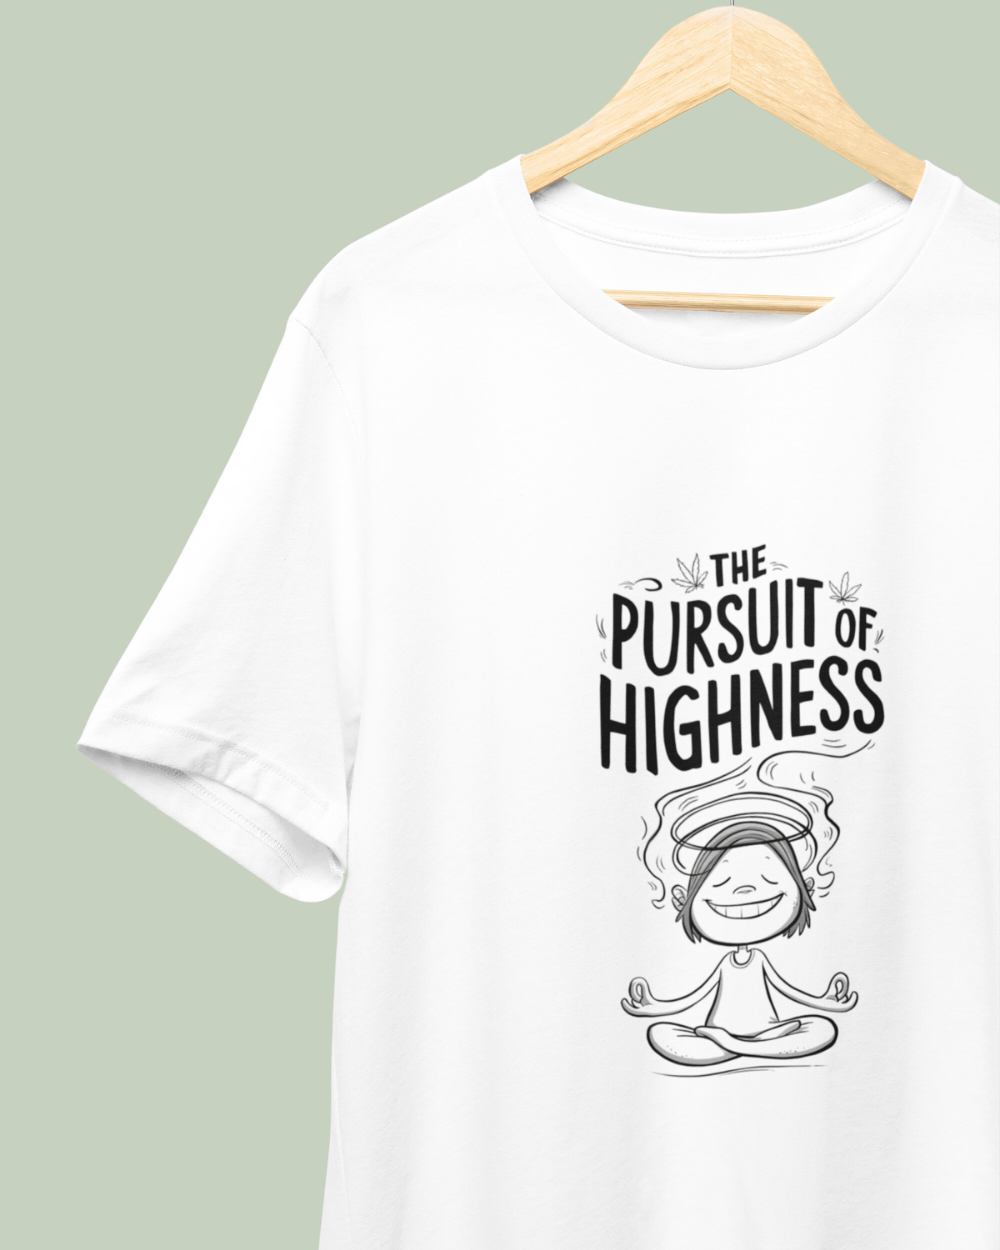 The Pursuit of Highness